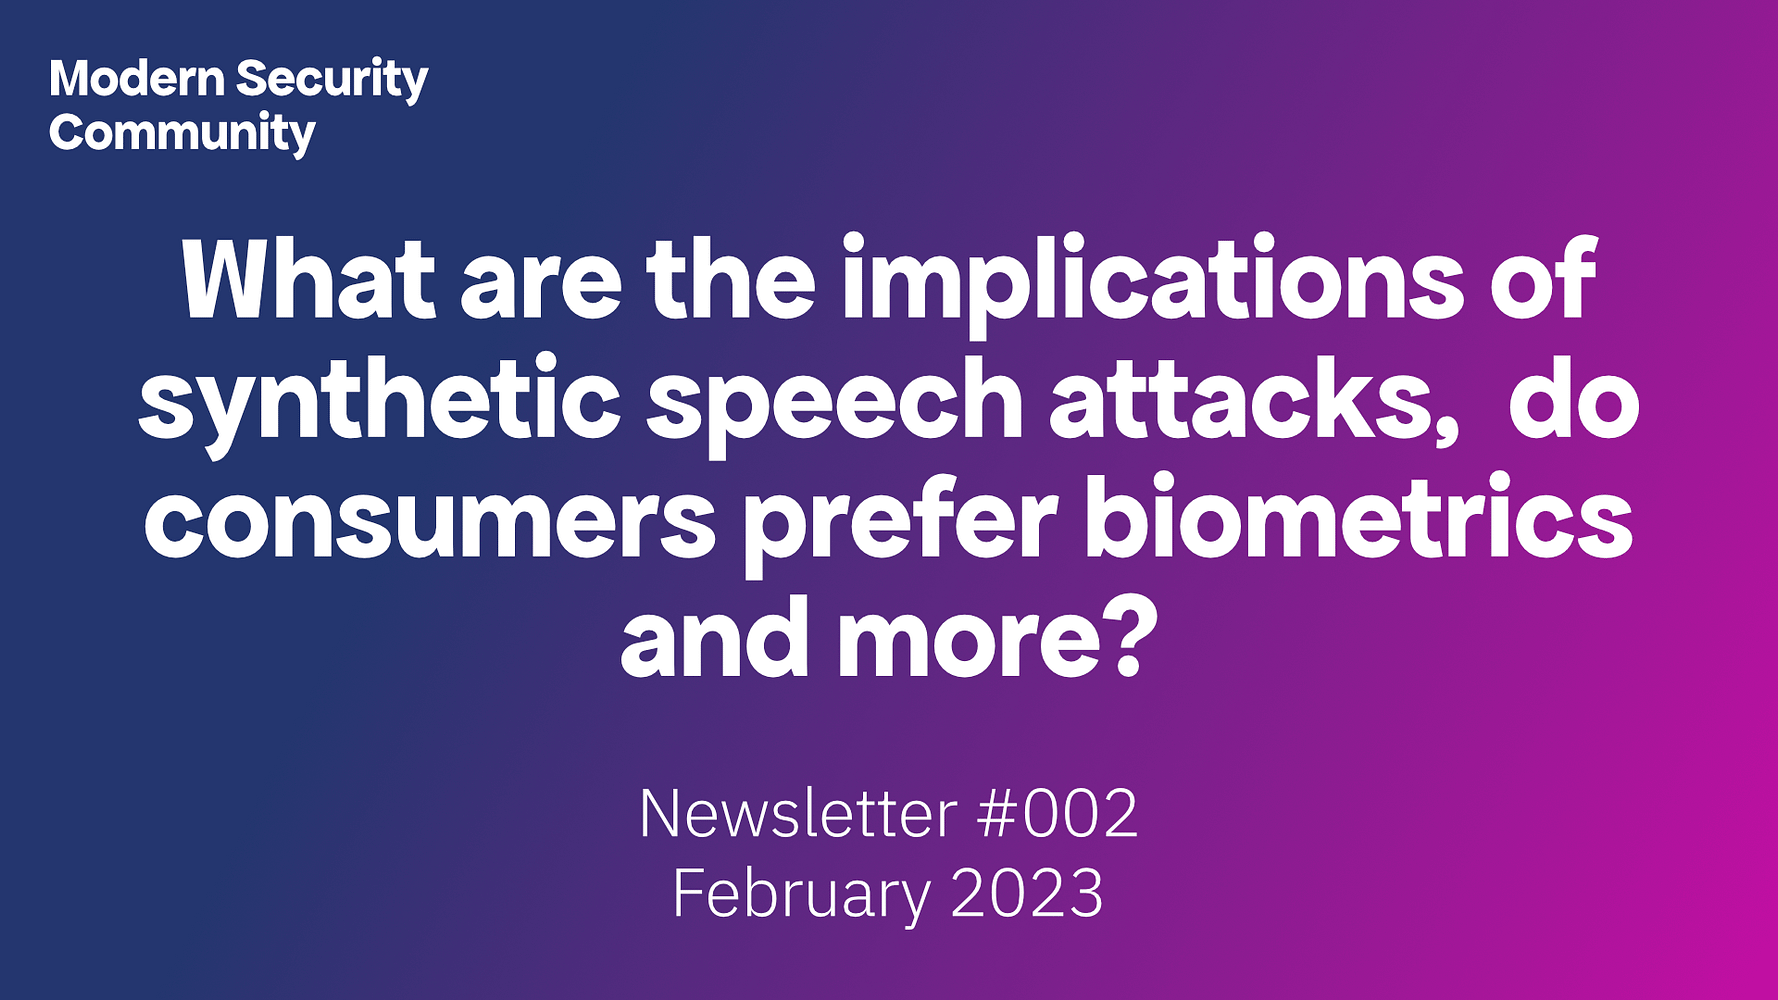 Featured image for “What are the implications of synthetic speech attacks? Do consumers prefer biometrics and more?”